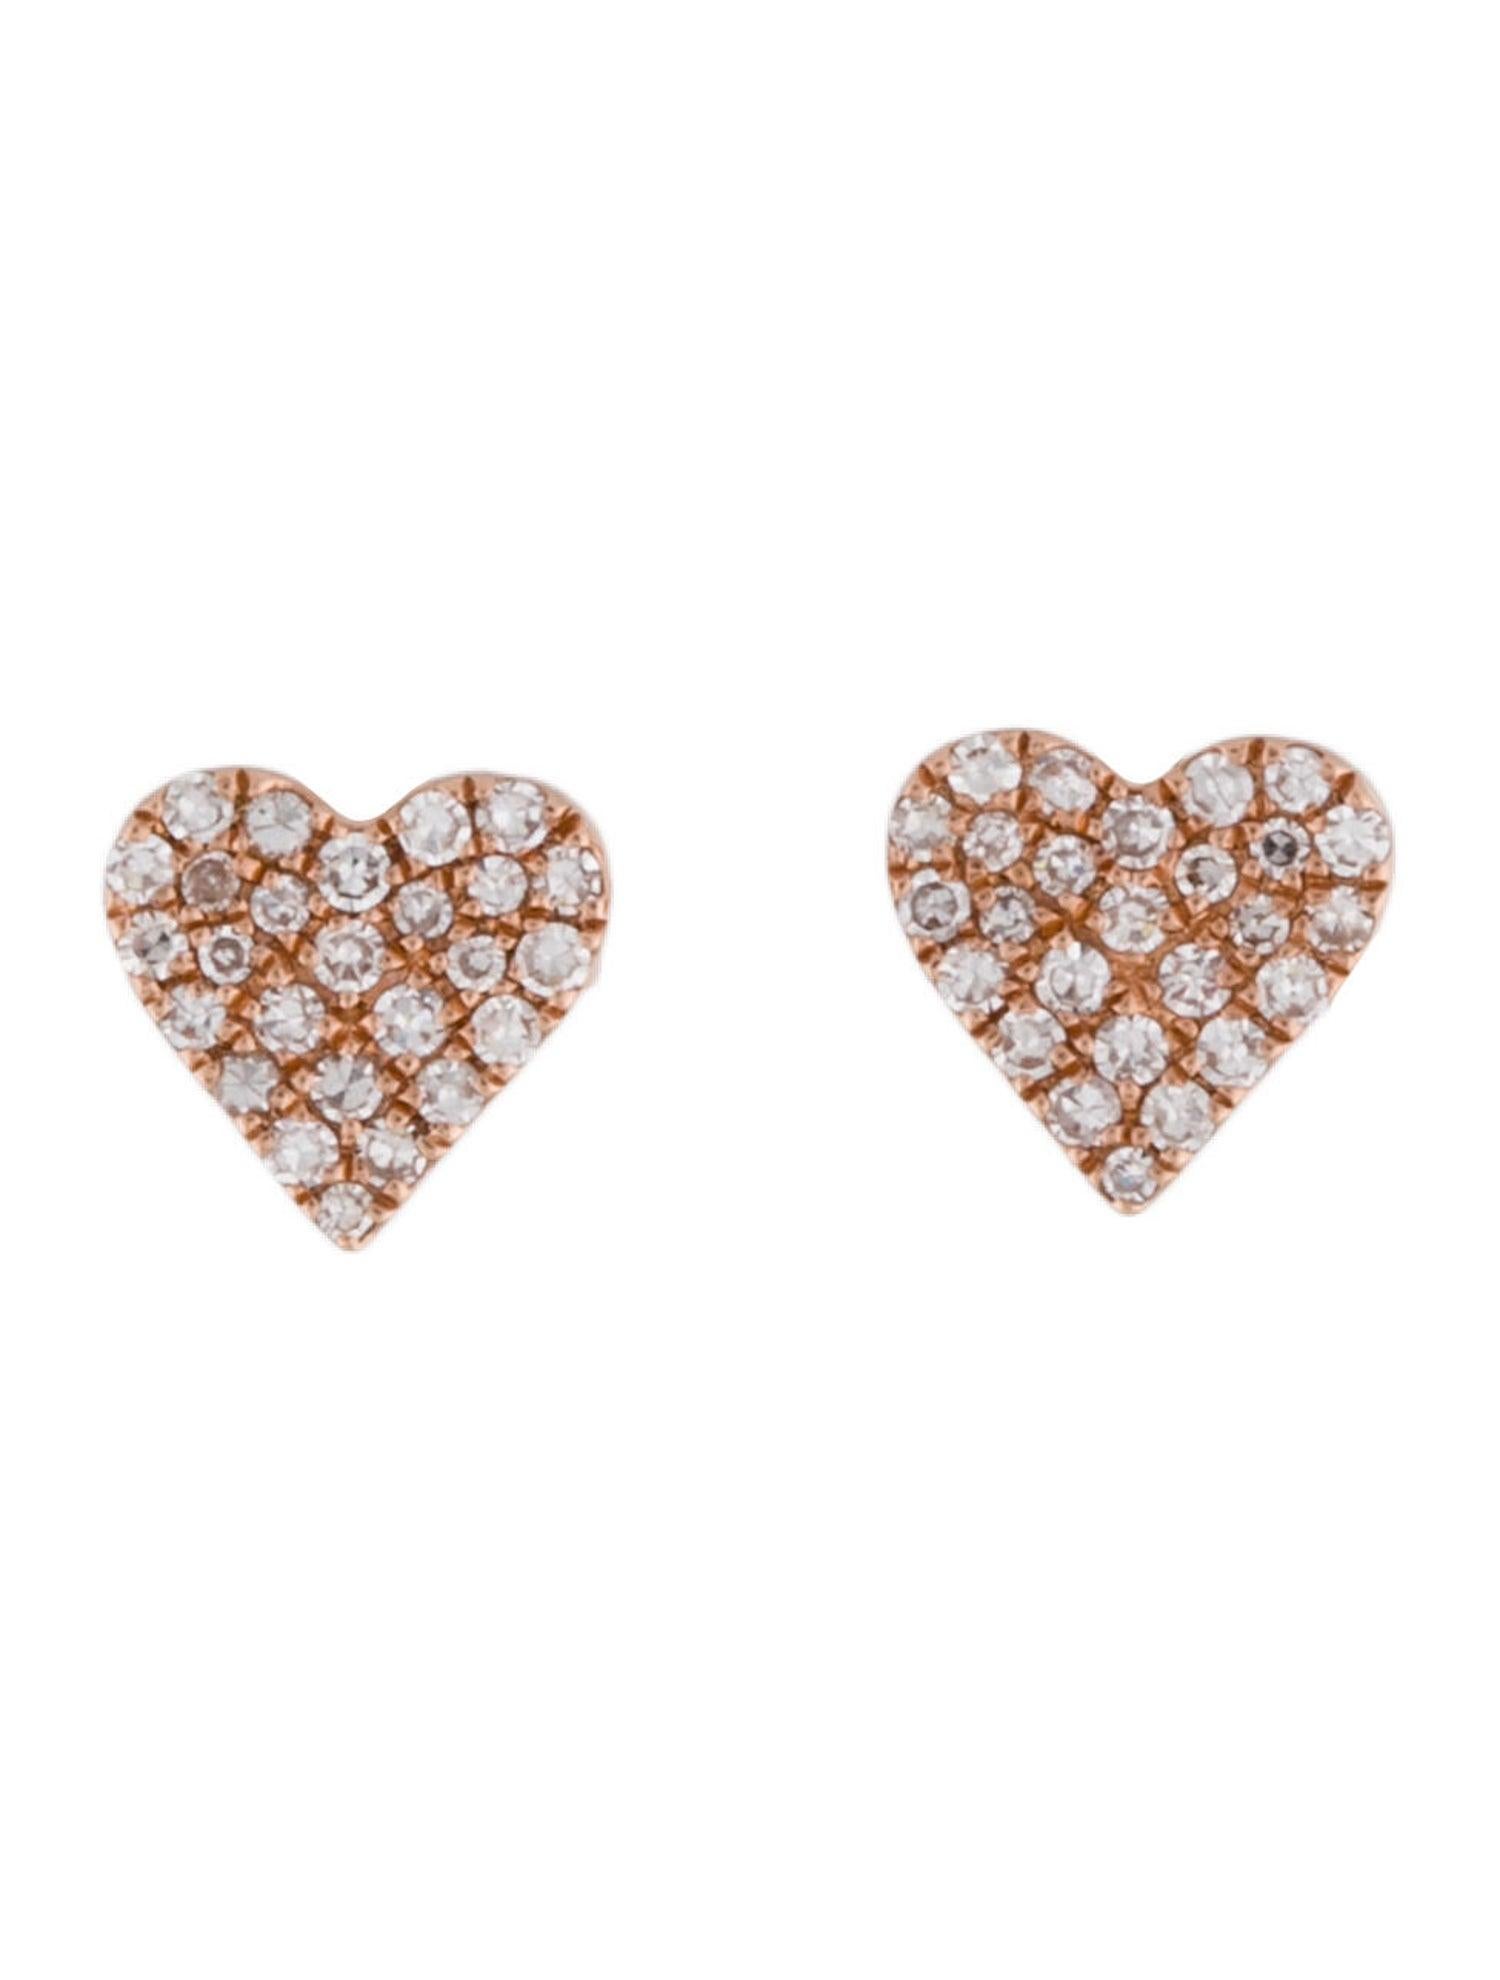 14 Karat Rose Gold 0.10 Carat Diamond Heart Earrings In New Condition For Sale In Great neck, NY